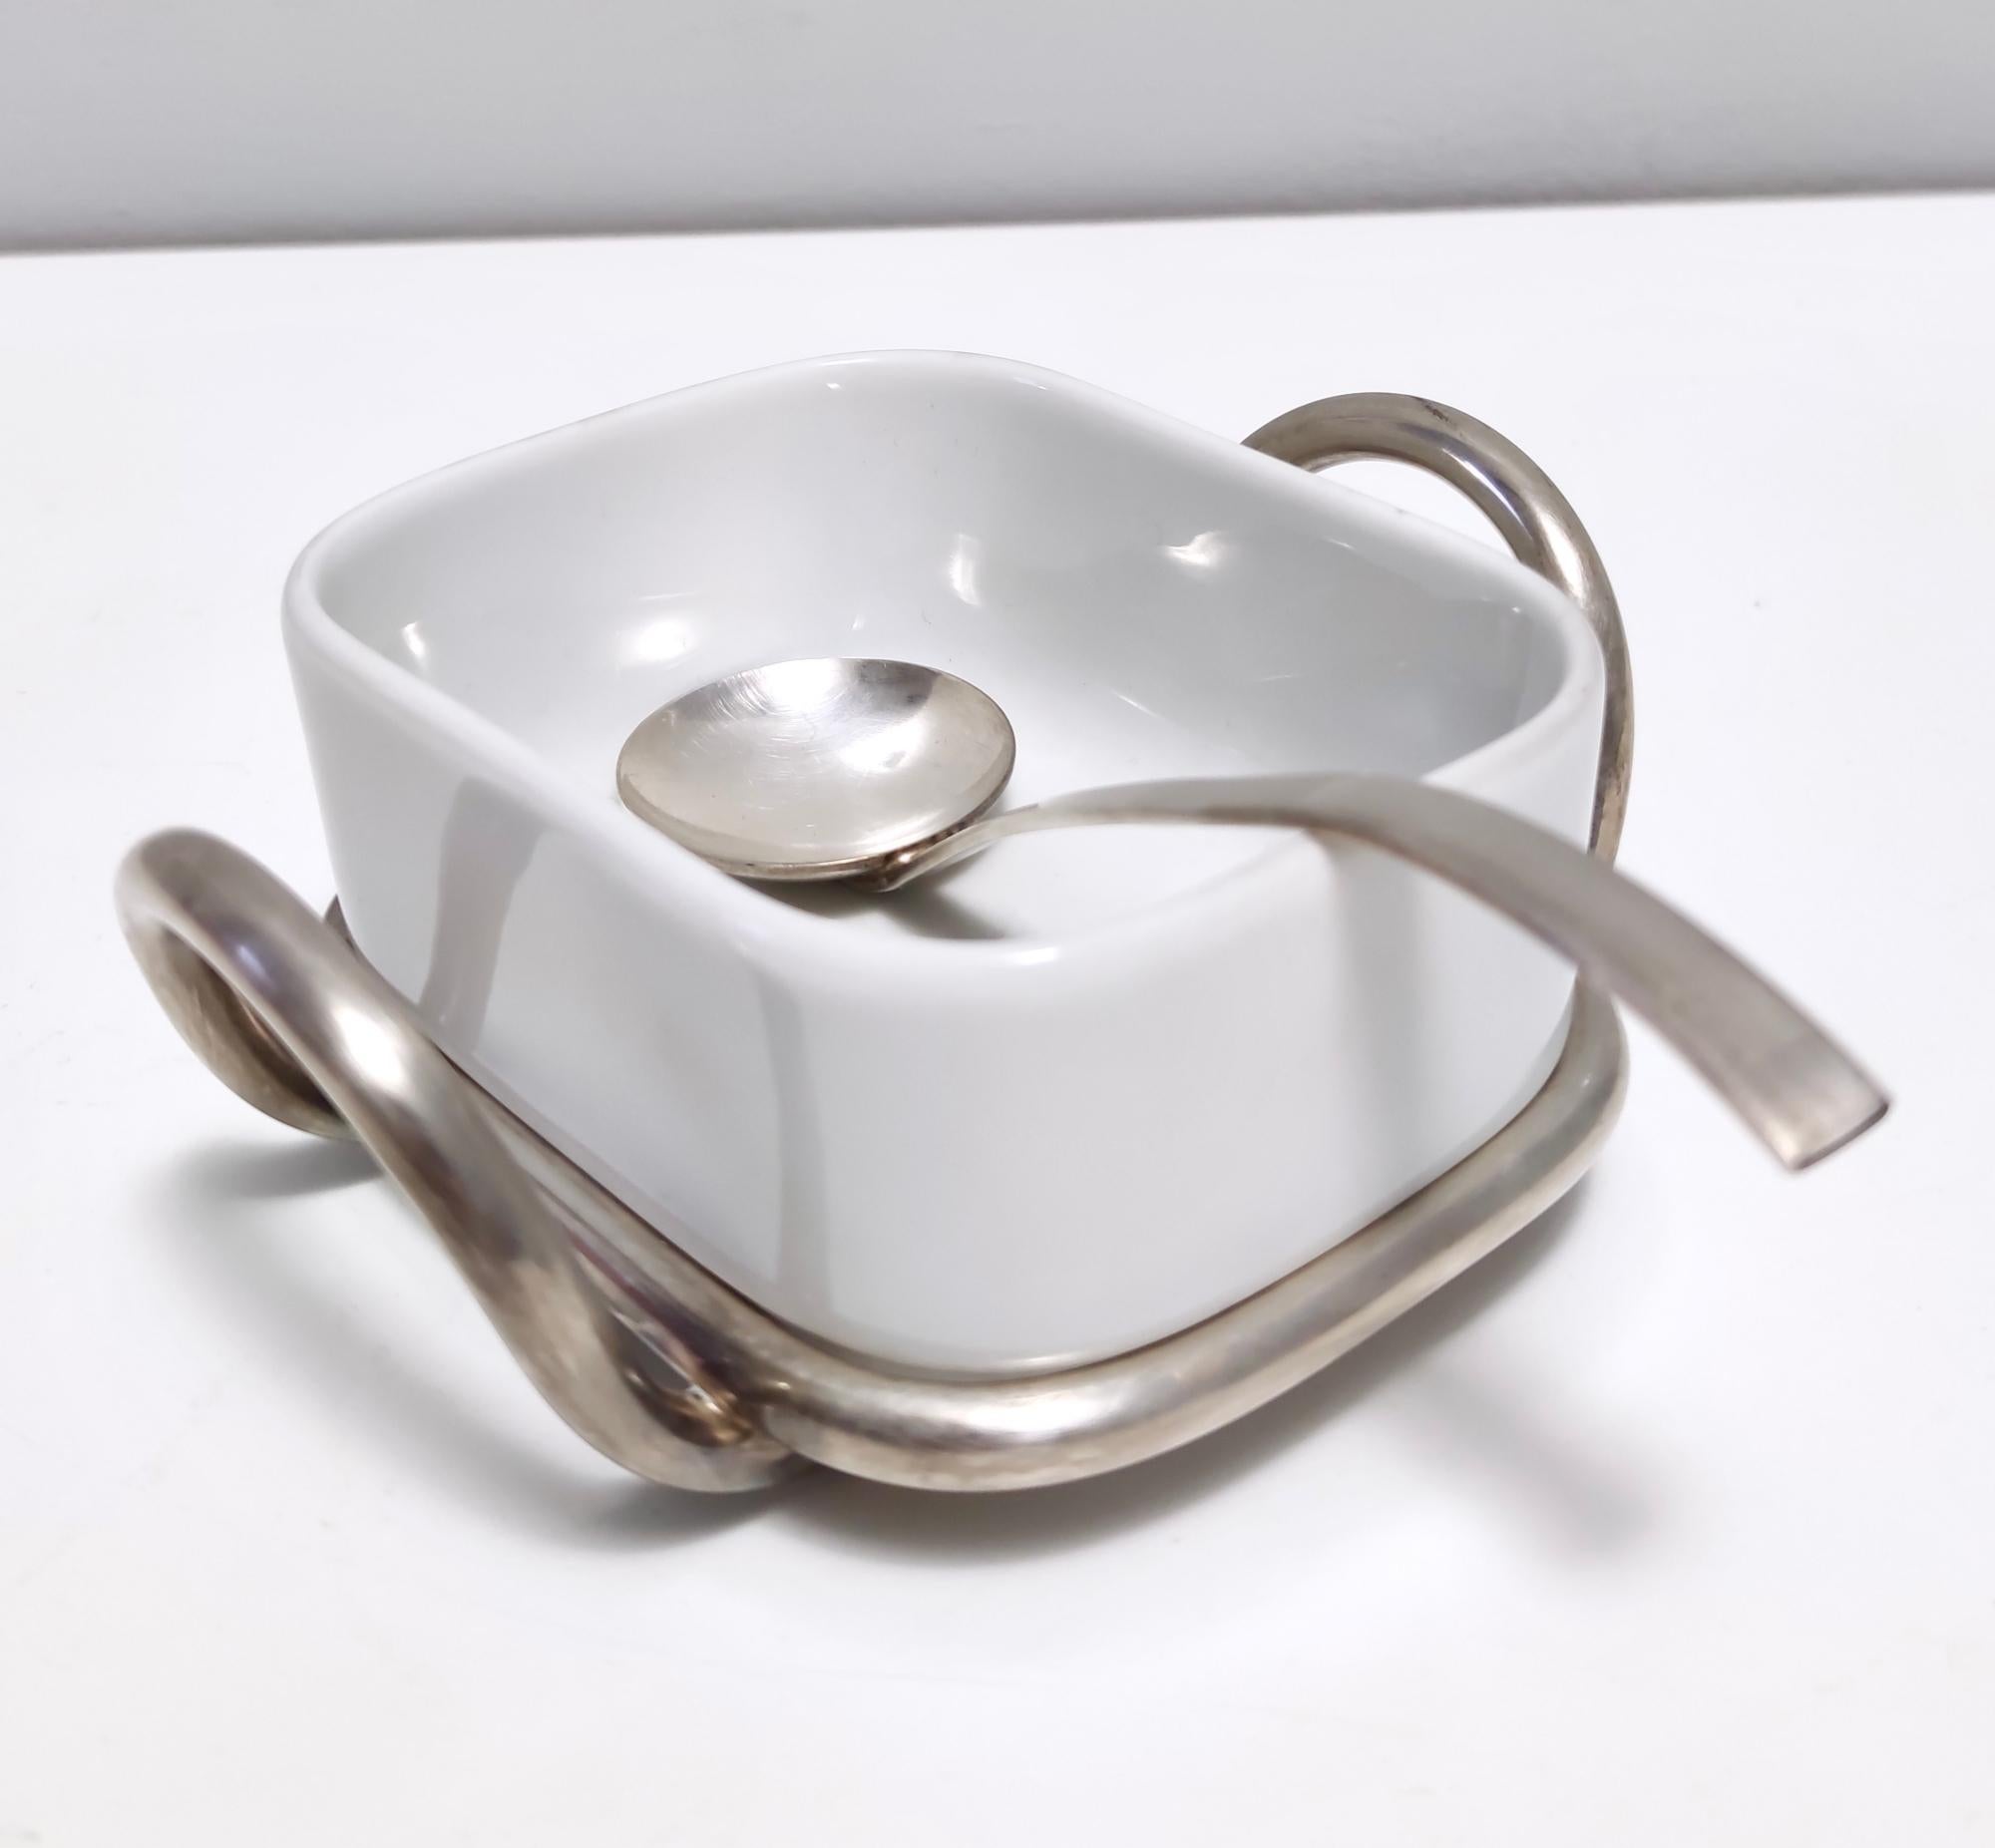 Late 20th Century Postmodern Lino Sabattini Silver-Plated and Ceramic Cheese Bowl with Spoon